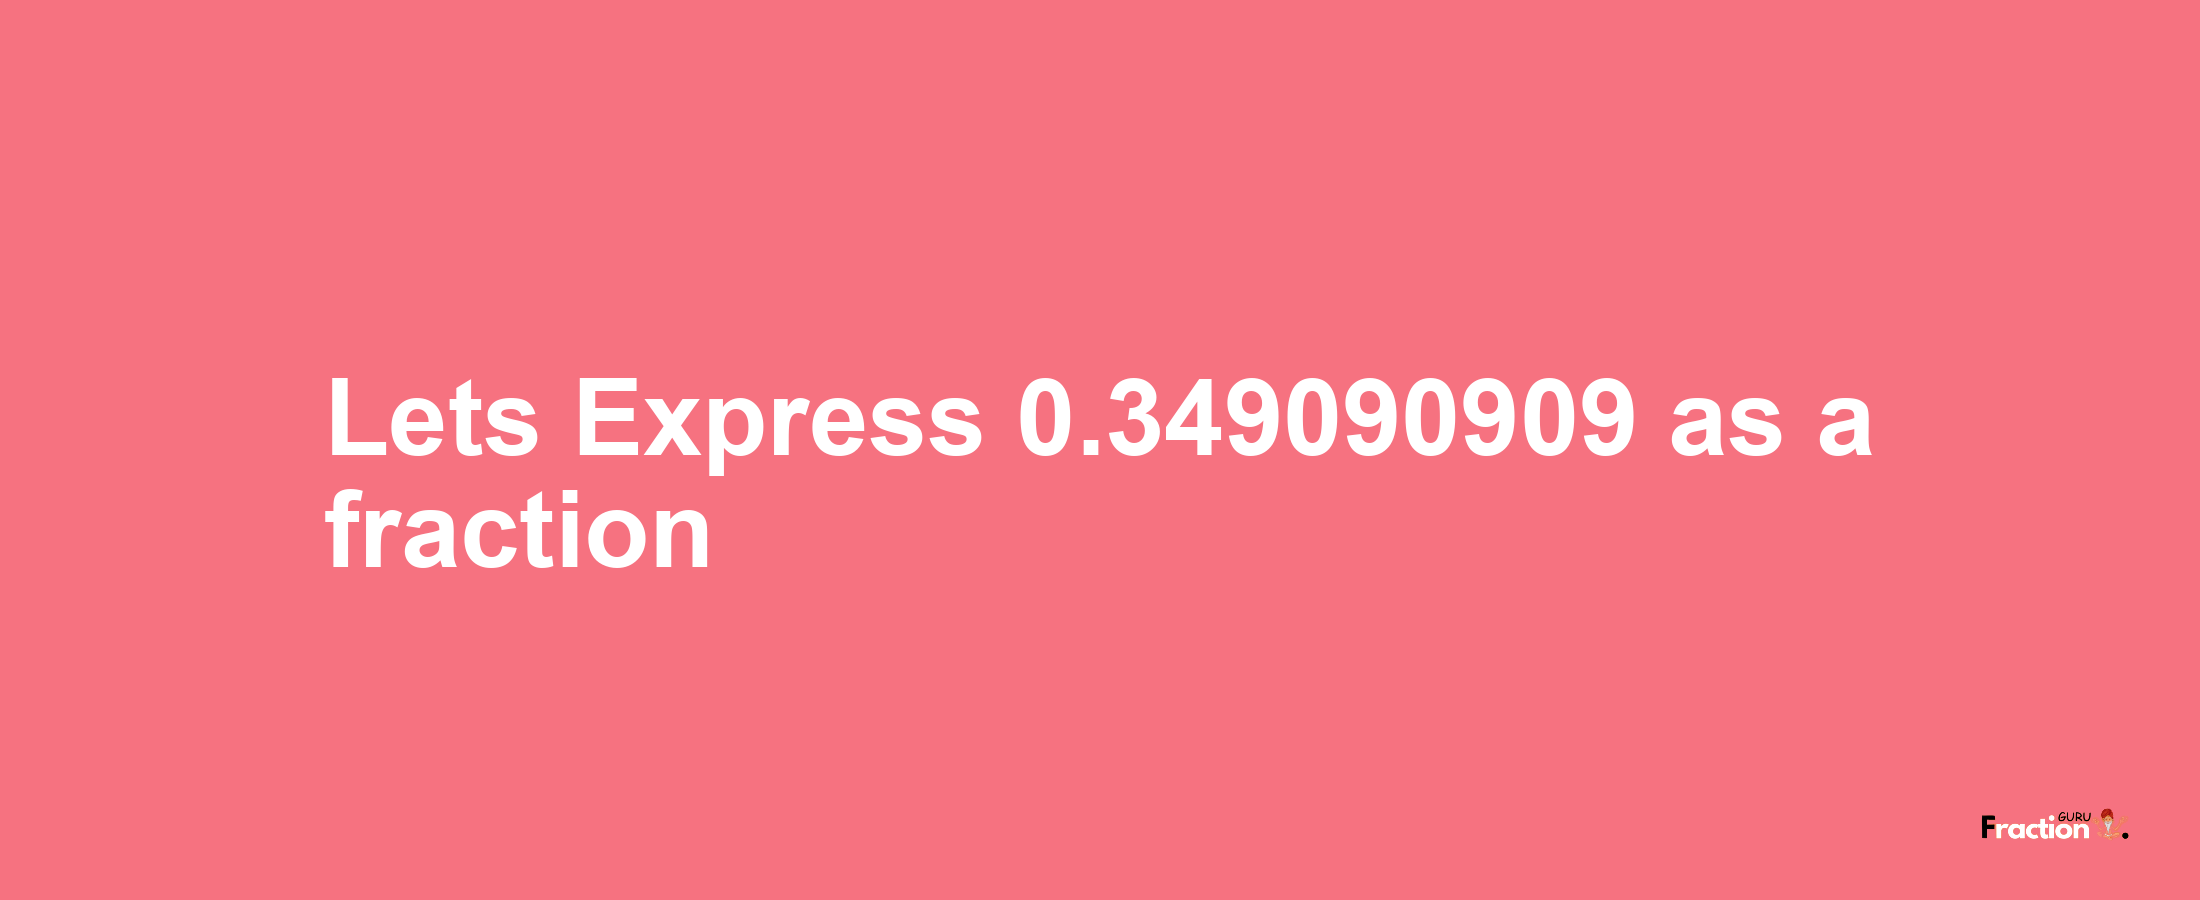 Lets Express 0.349090909 as afraction